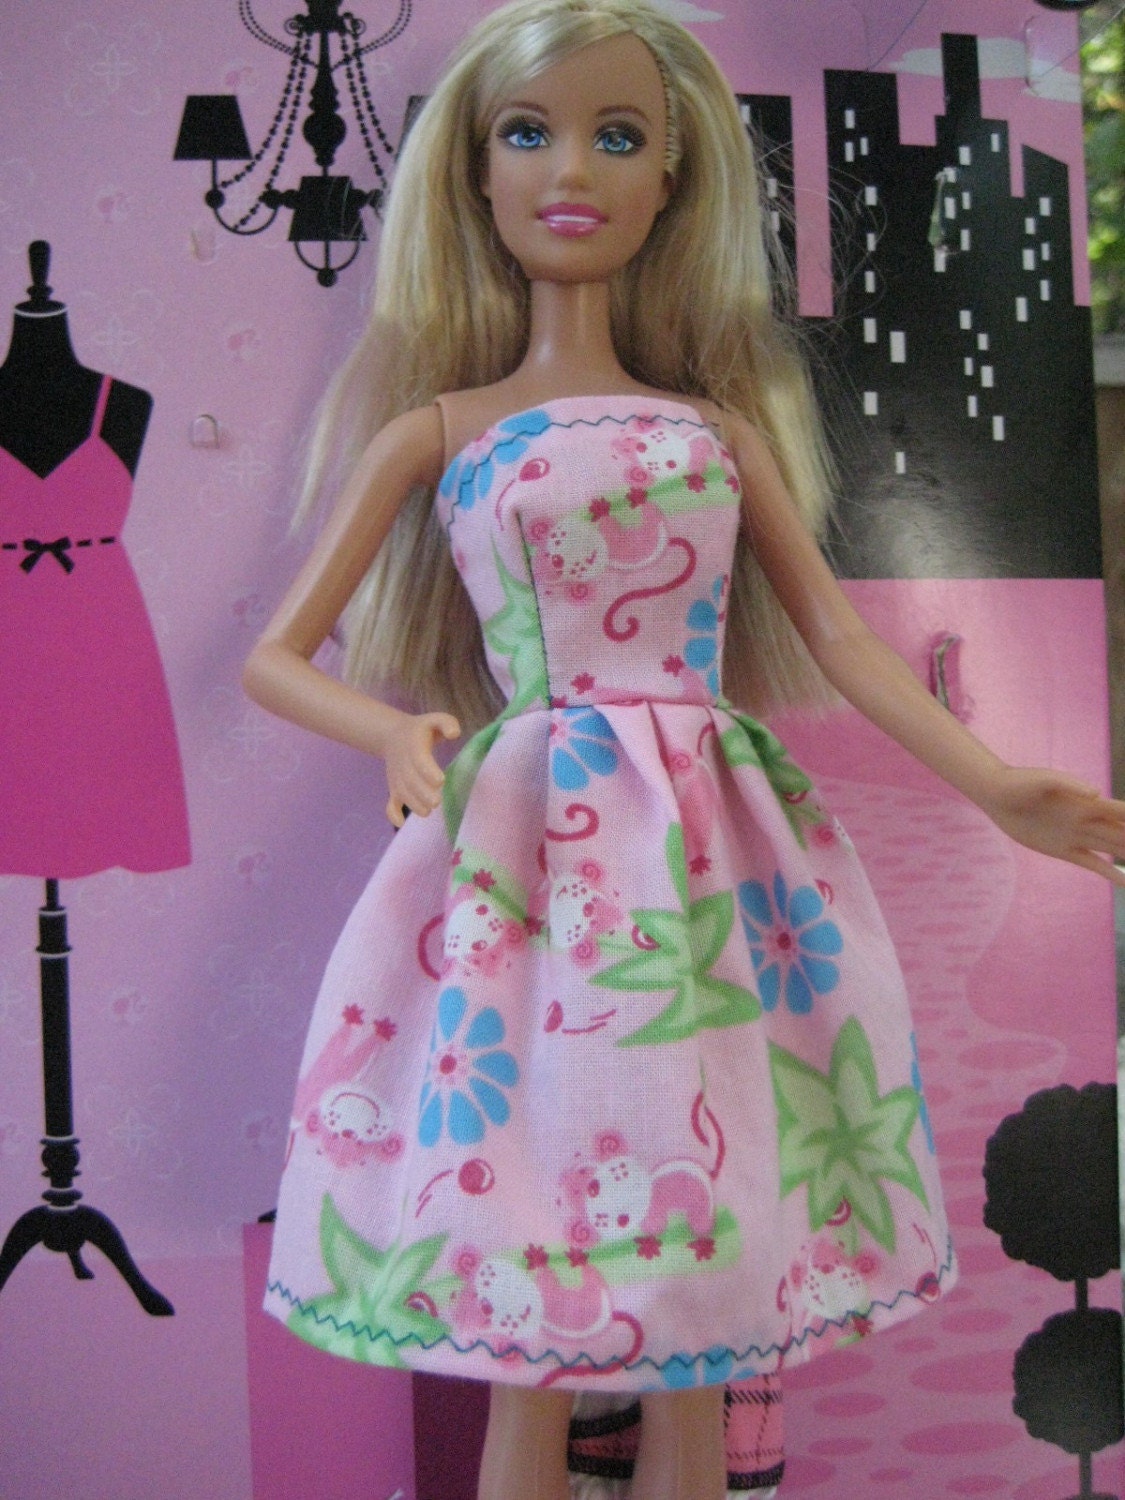 NEW PINK DRESS FOR BARBIE DOLLS-BARBIE CLOTHING